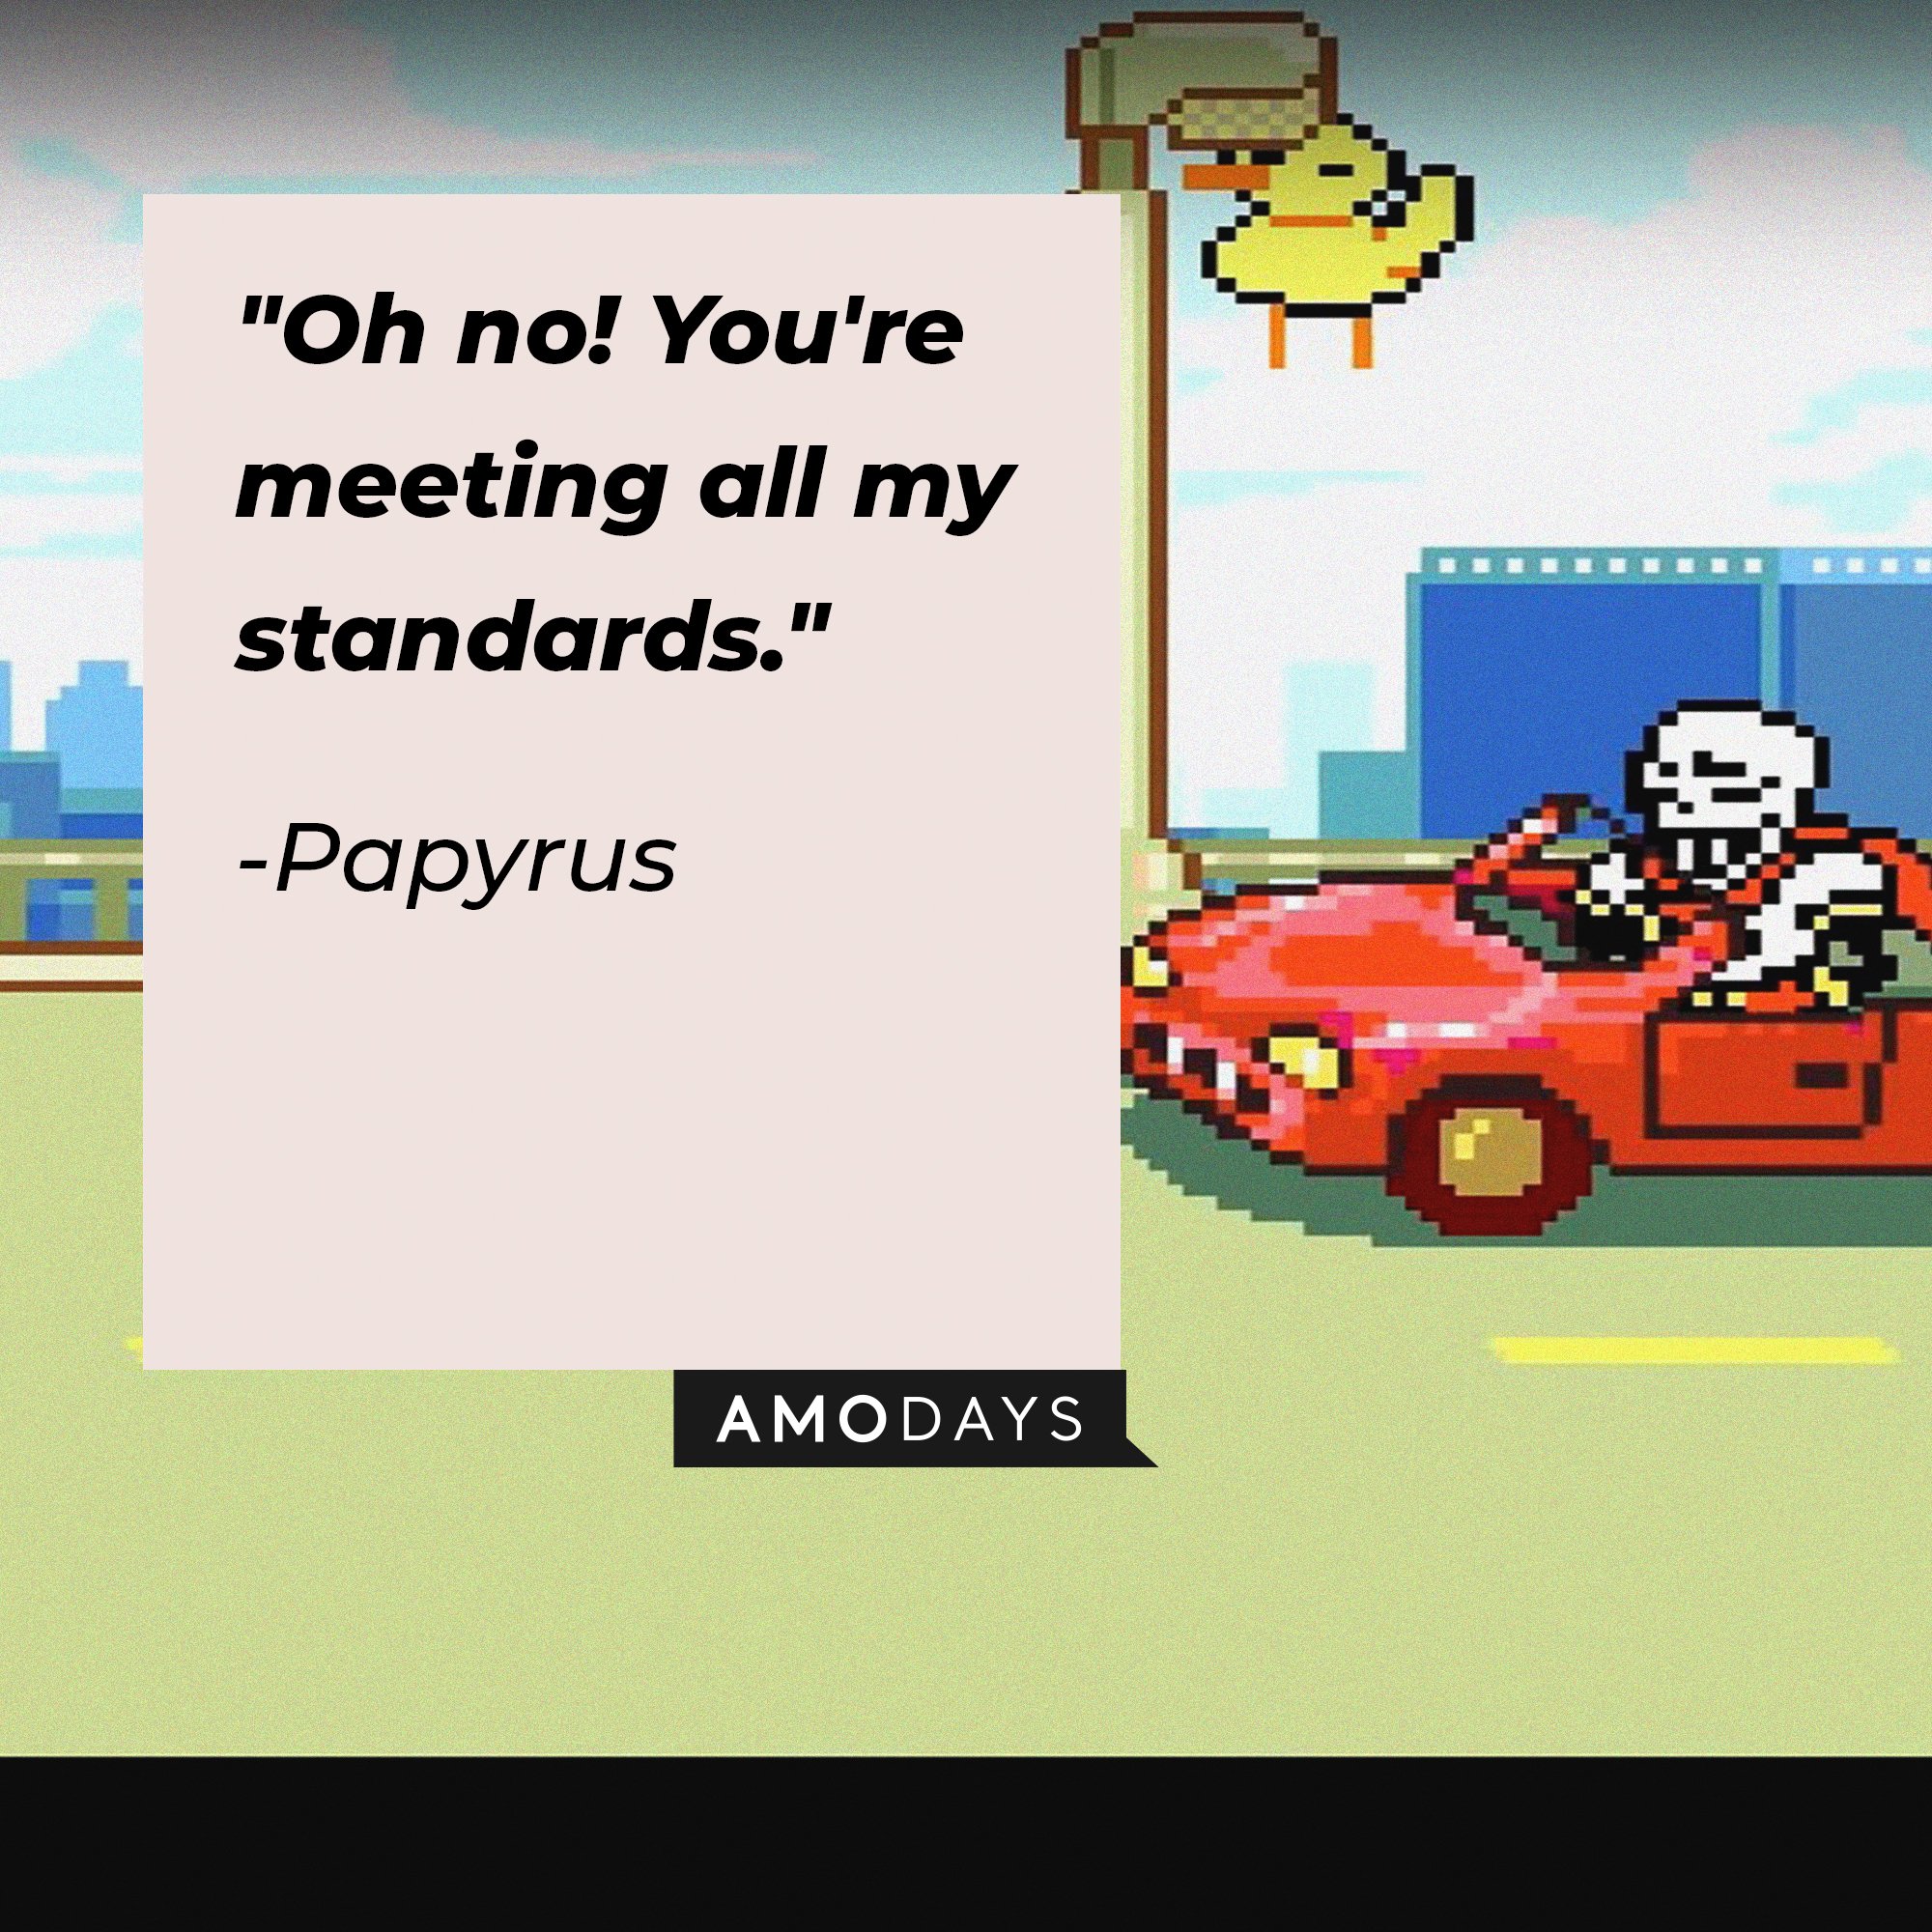 Papyrus’ quote: "Oh no! You're meeting all my standards." | Image: AmoDays